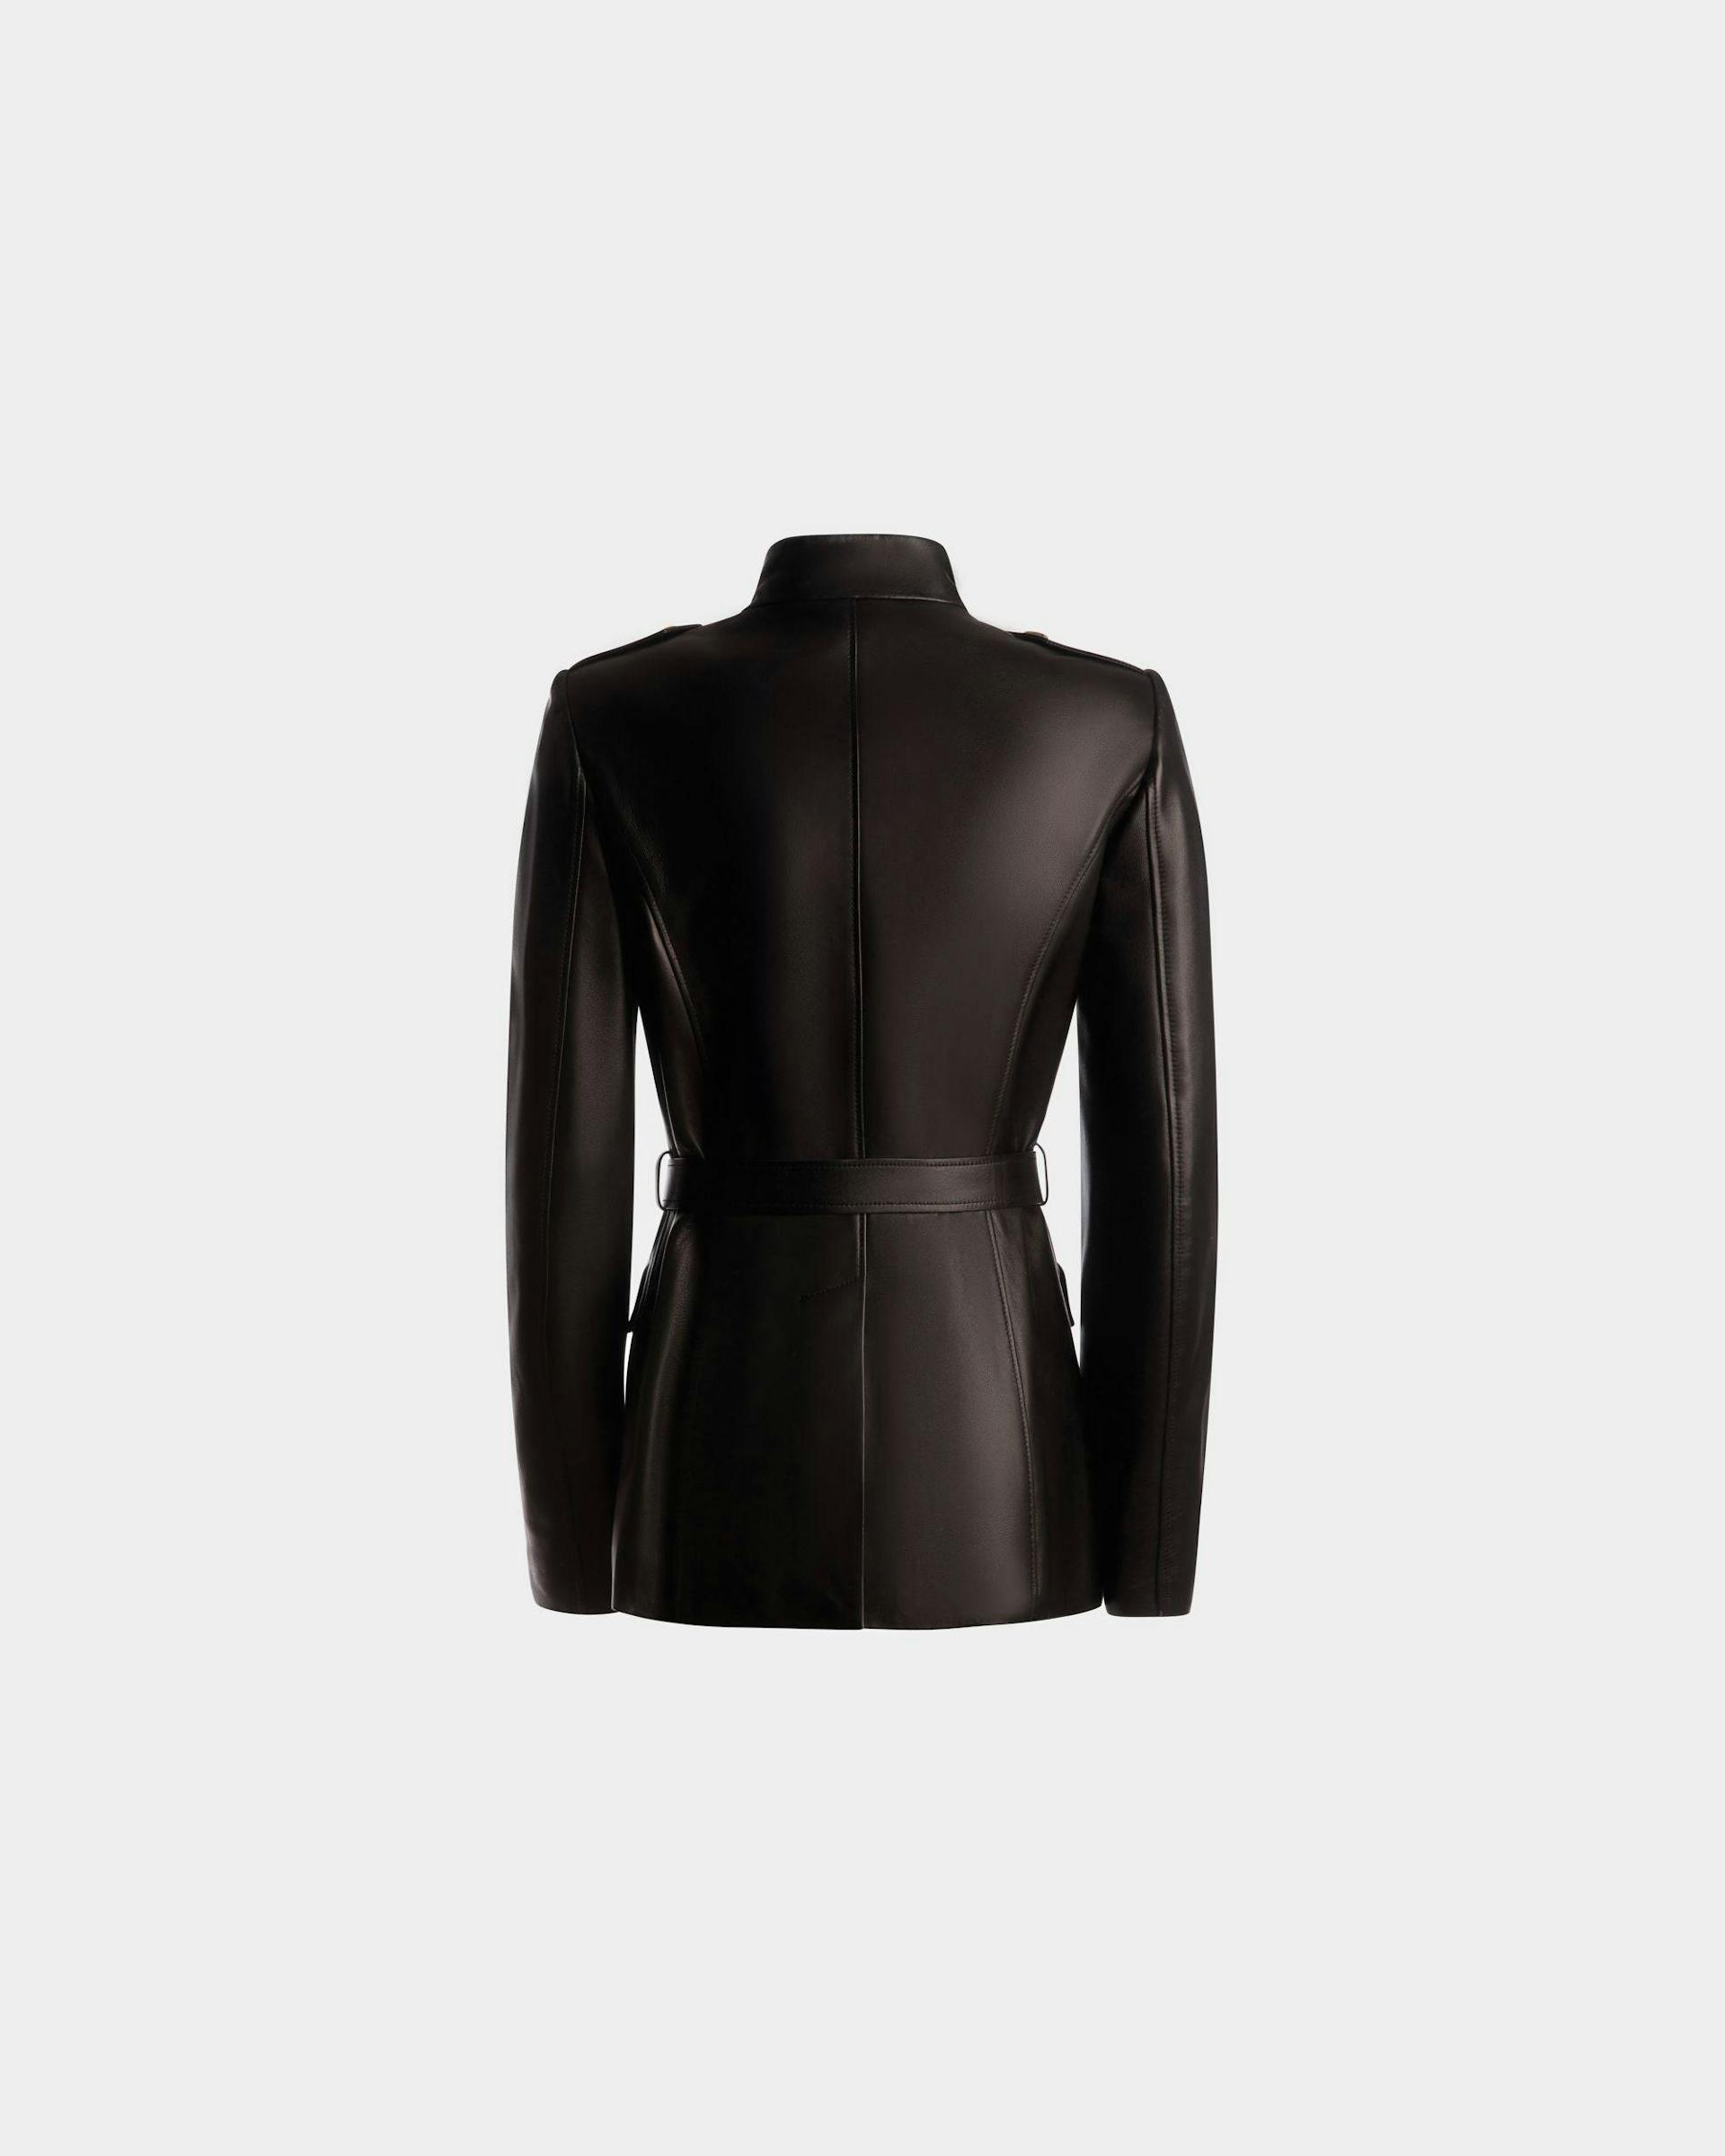 Women's Belted Jacket In Black Leather | Bally | Still Life Back